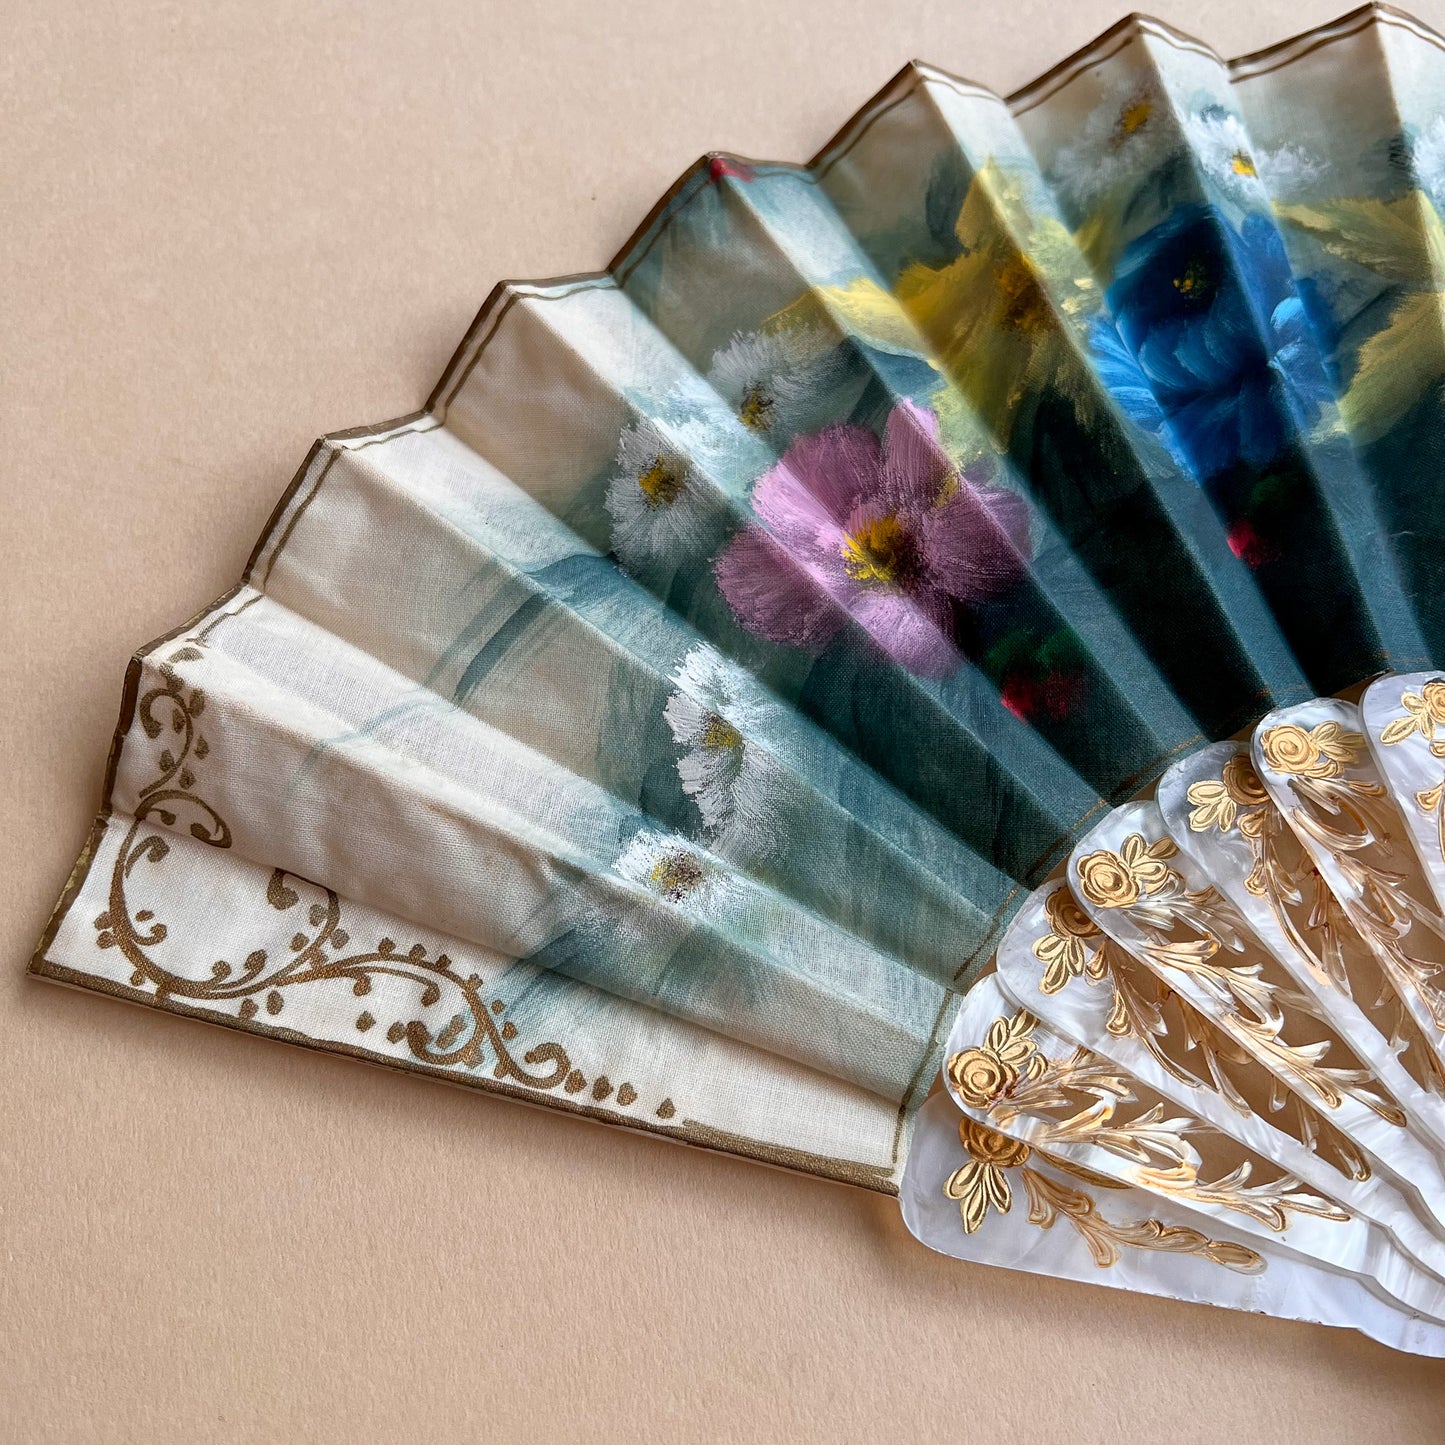 1960s Mother of Pearl Fan With Hand Painted Flowers